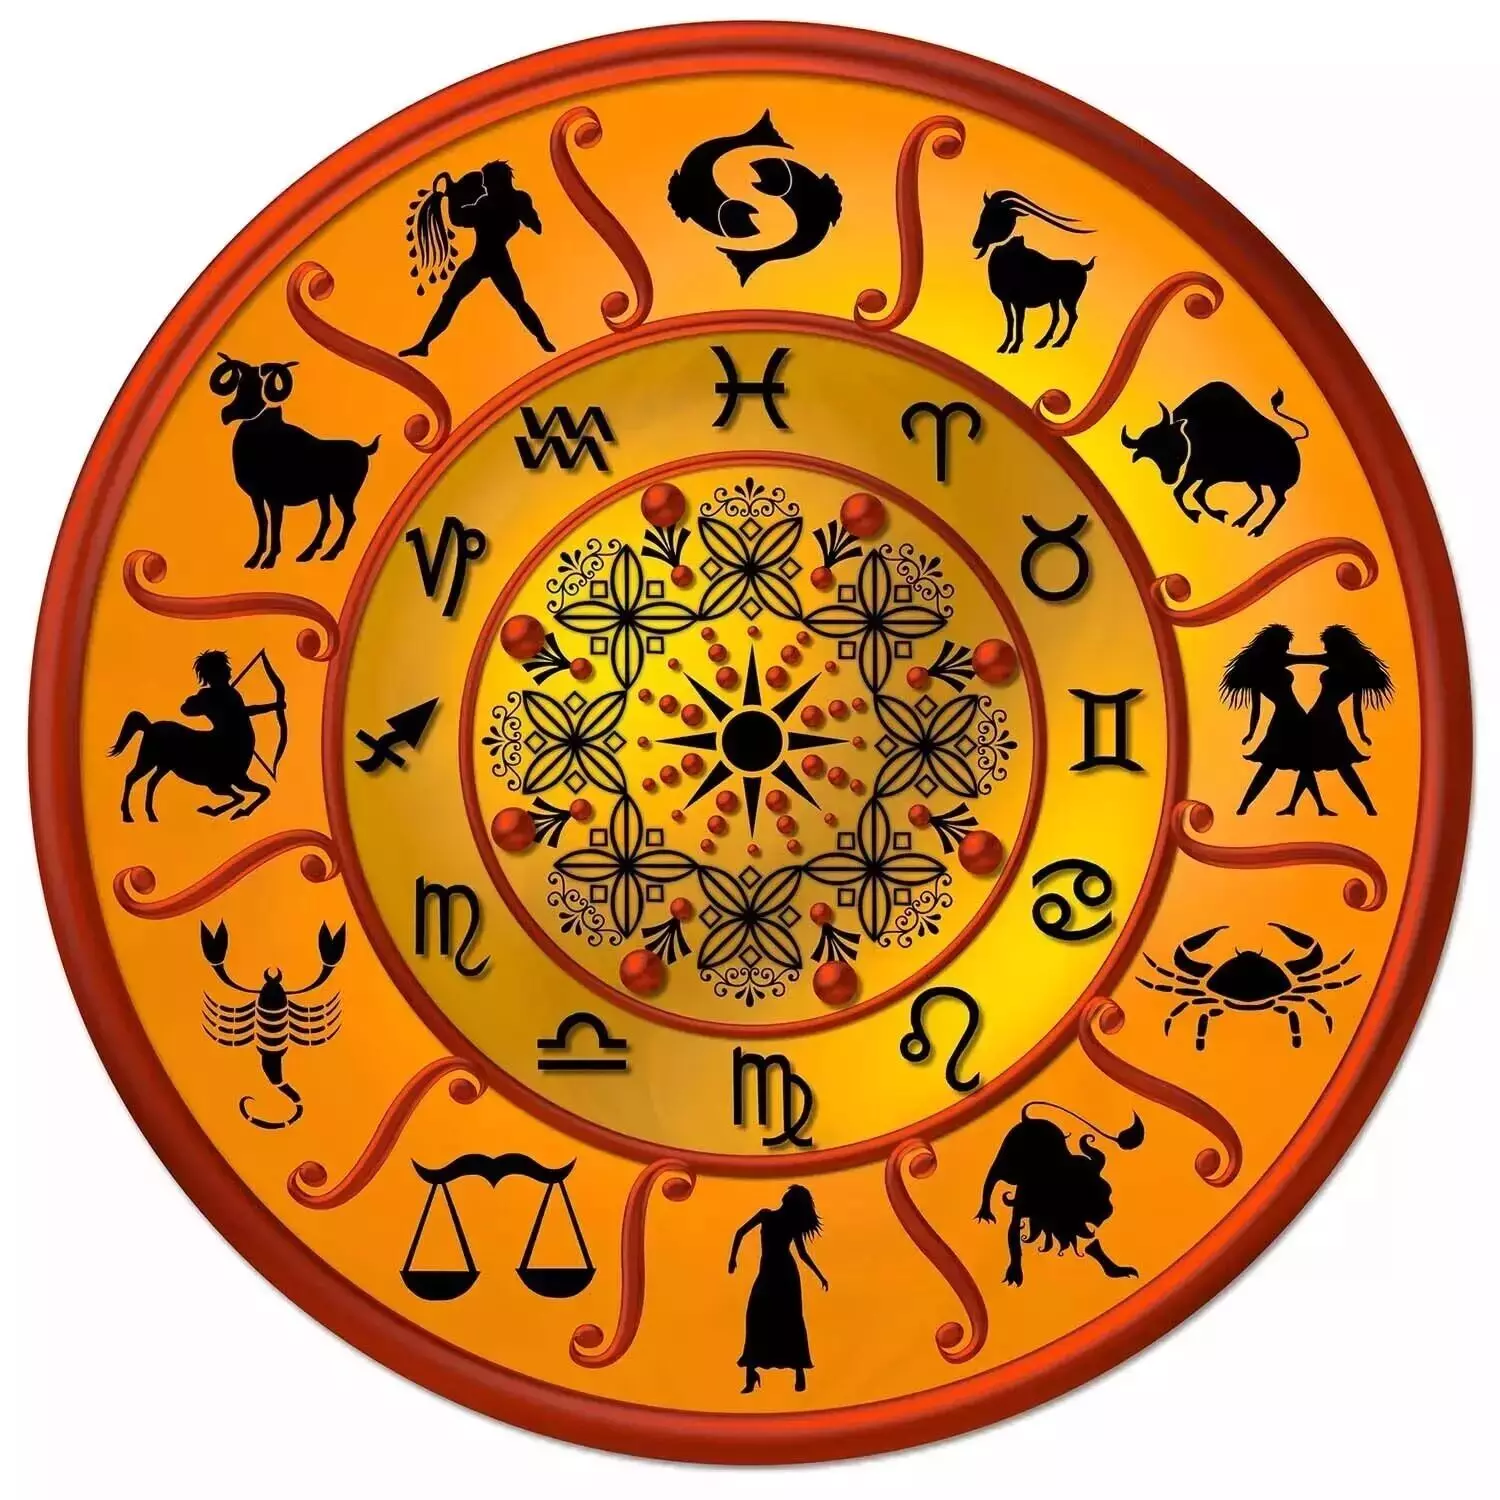 03 August  – Know your todays horoscope